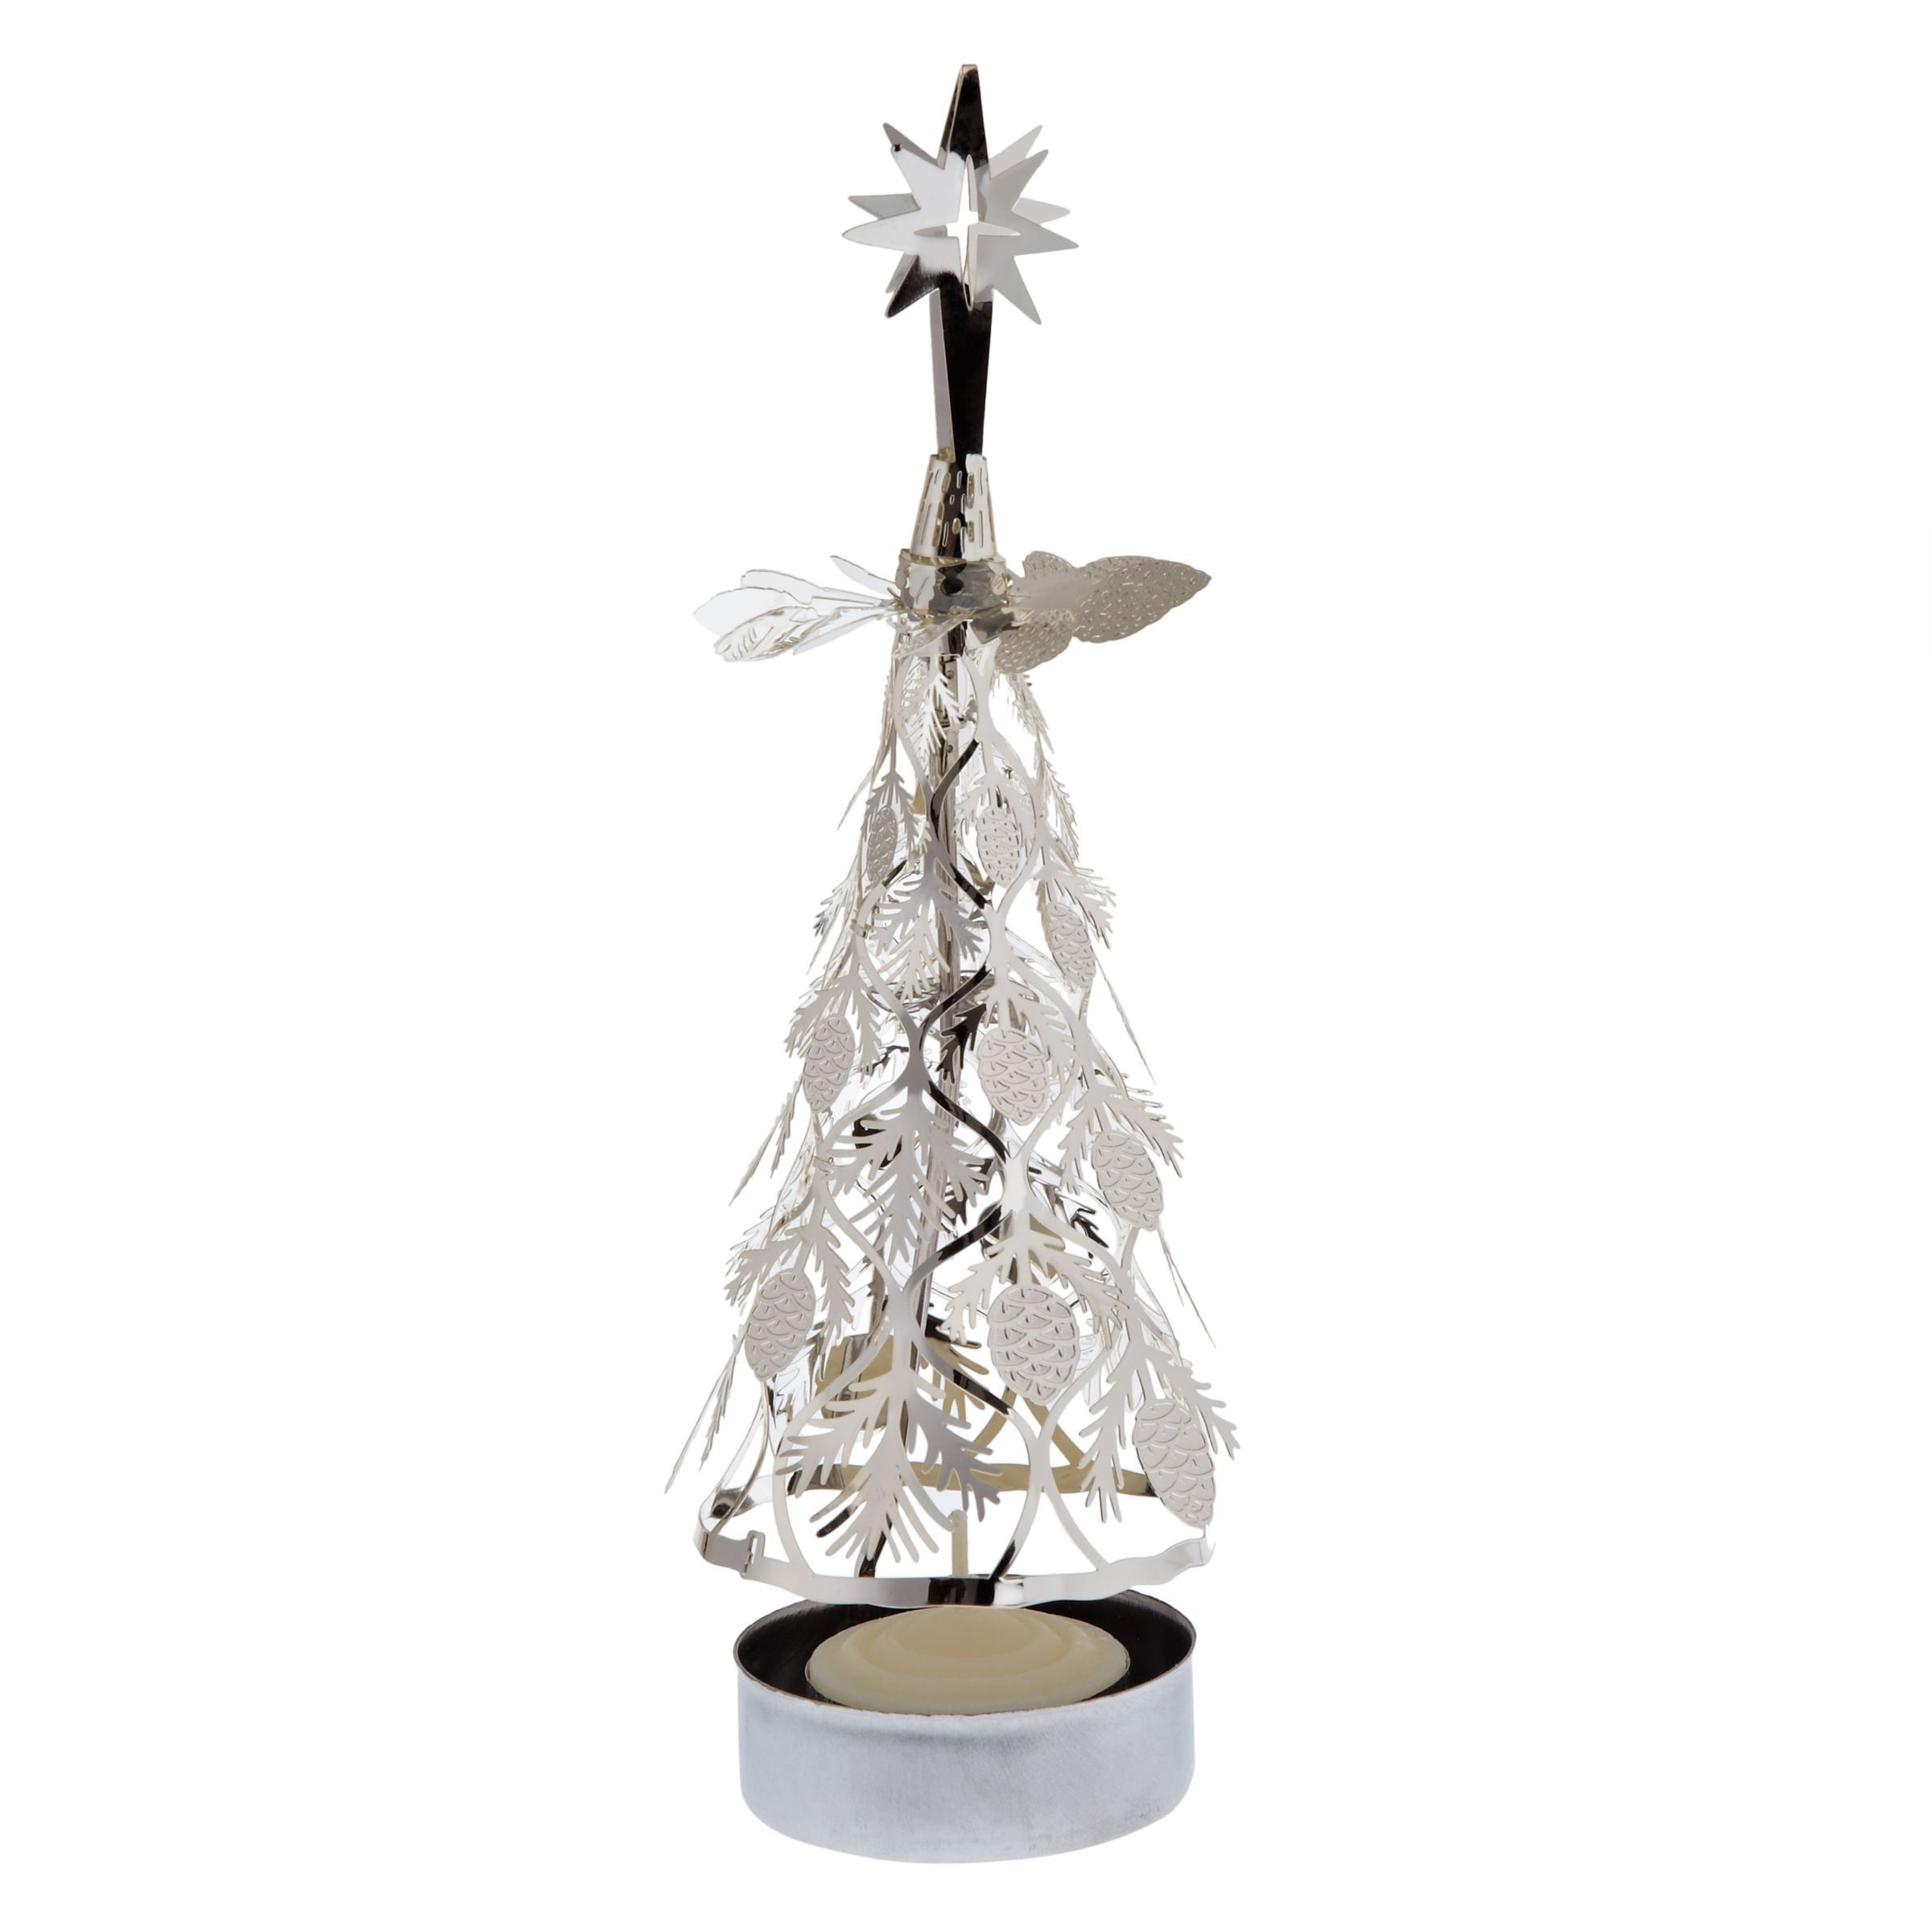 Pols Potten Spinning Tree and Pine Cones Tealight Holder, Small, Silver